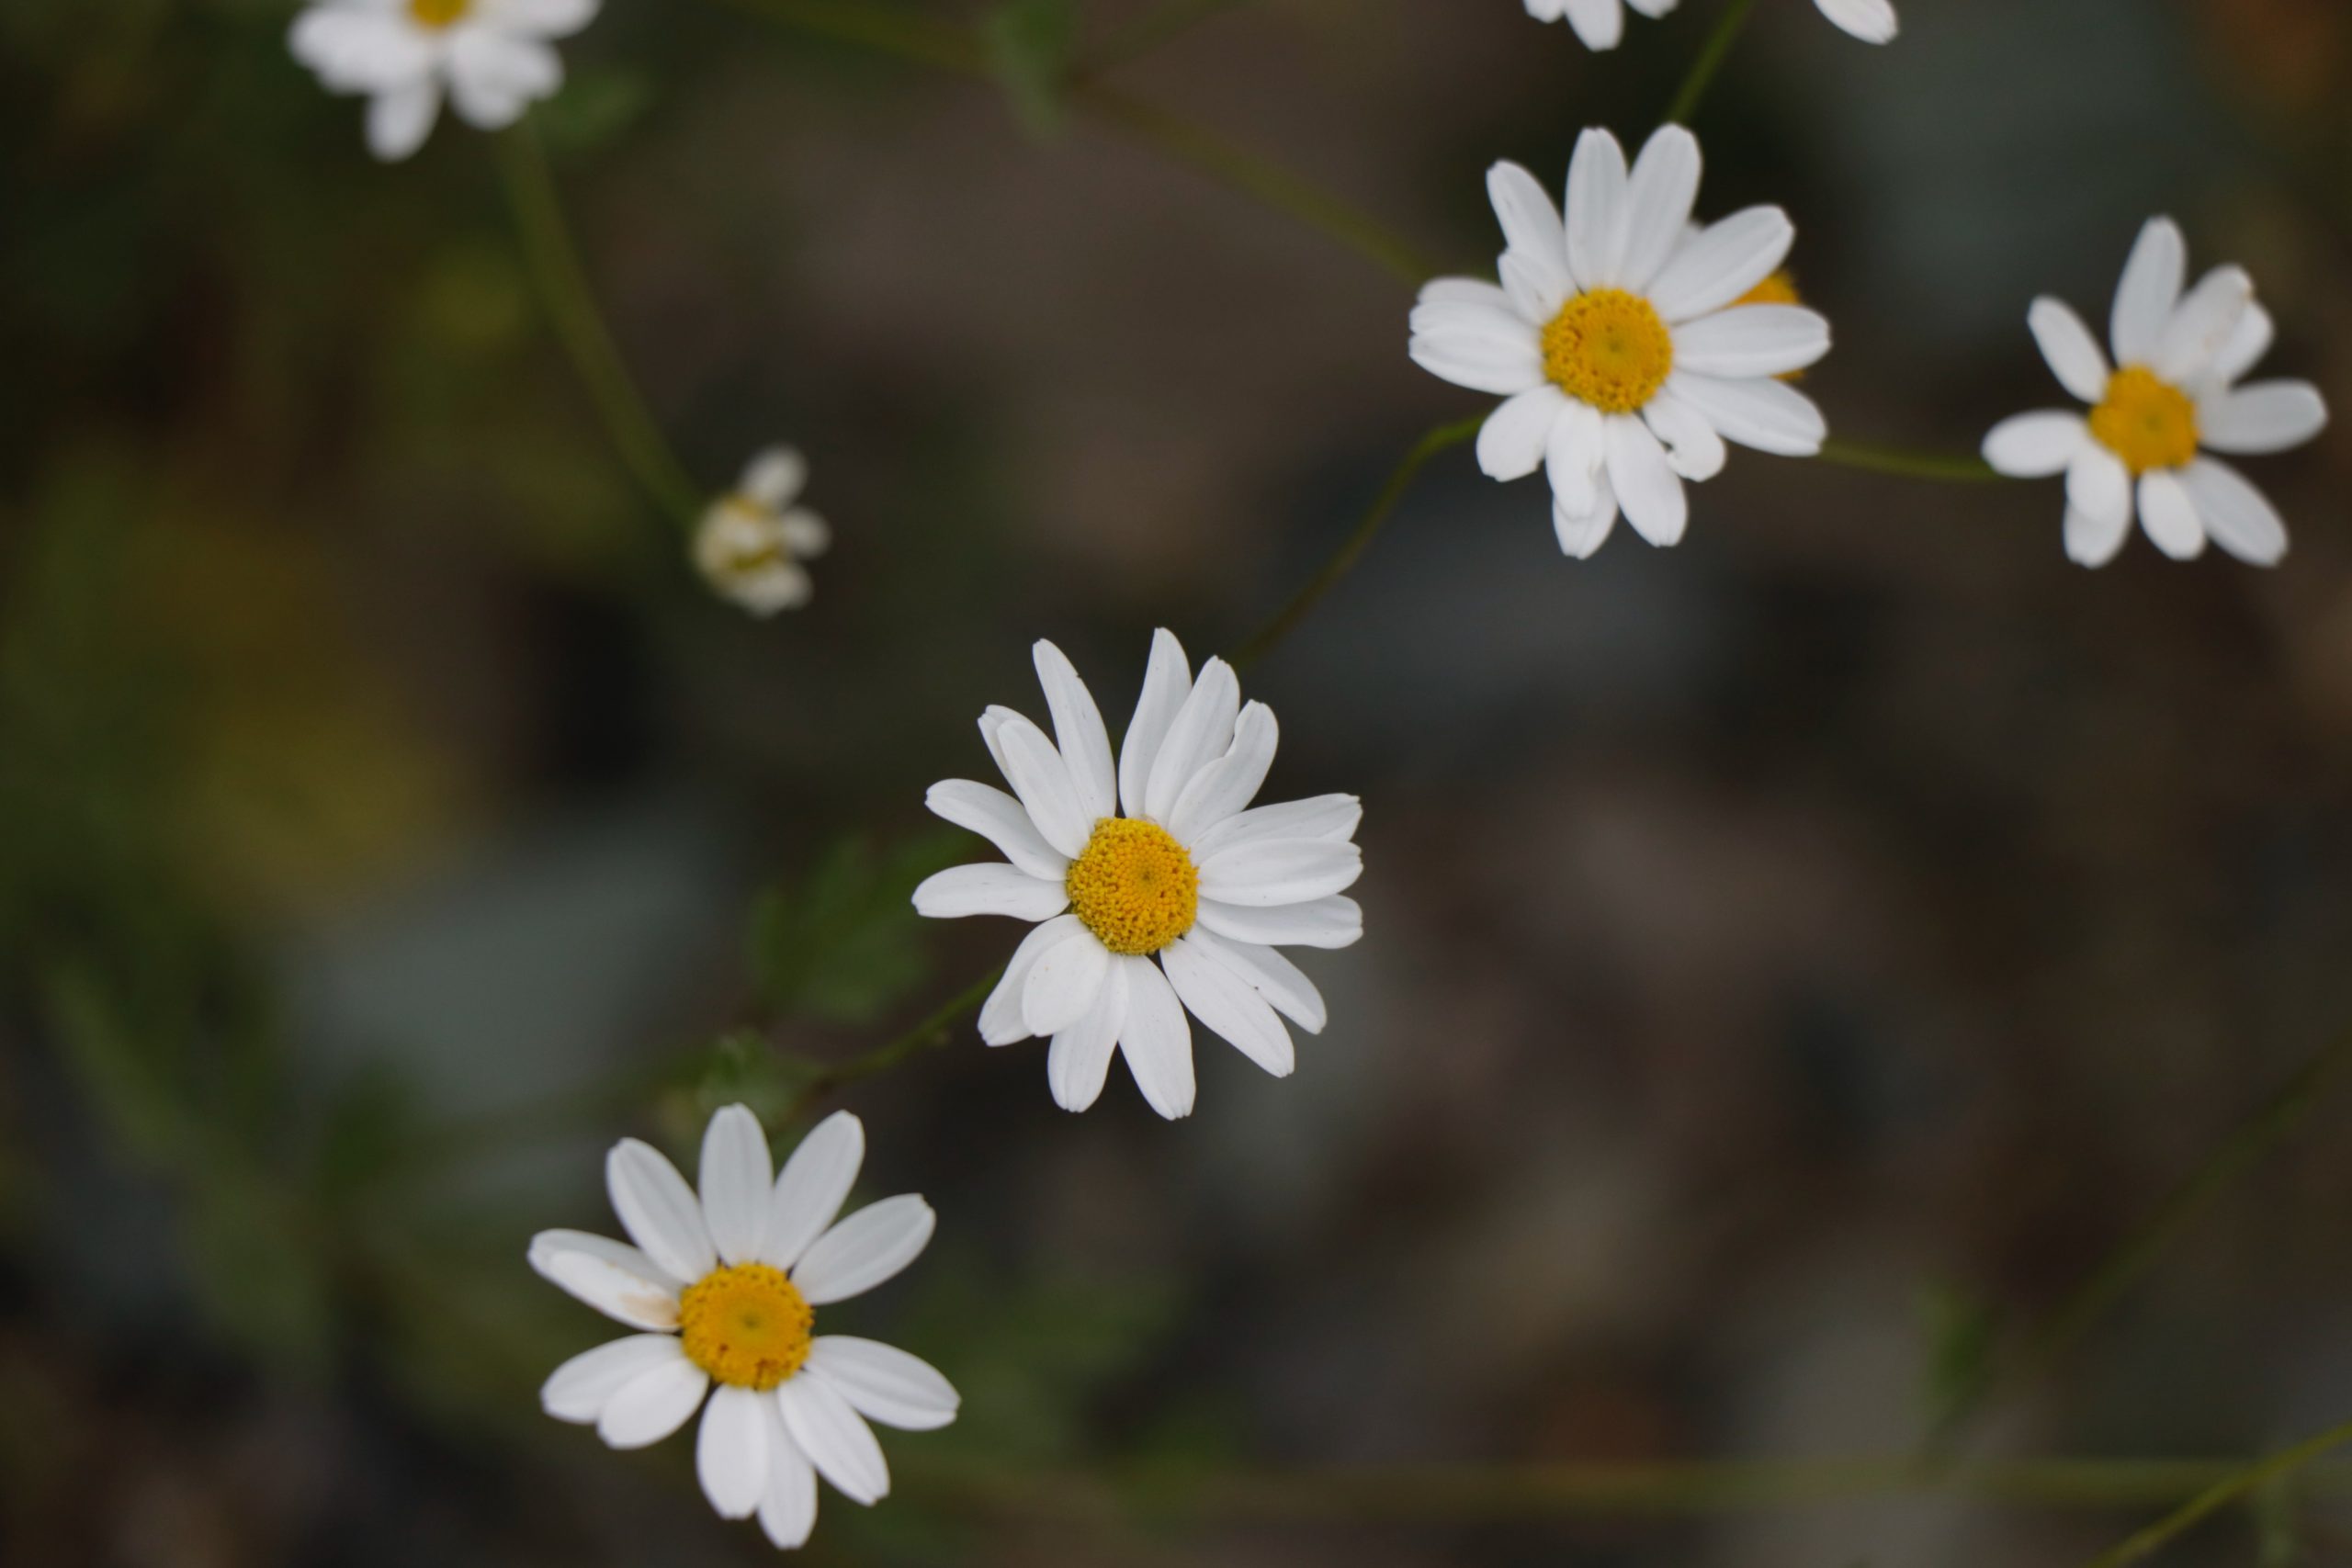 Close-up on the heads of half a dozen white daisies in an outdoor setting